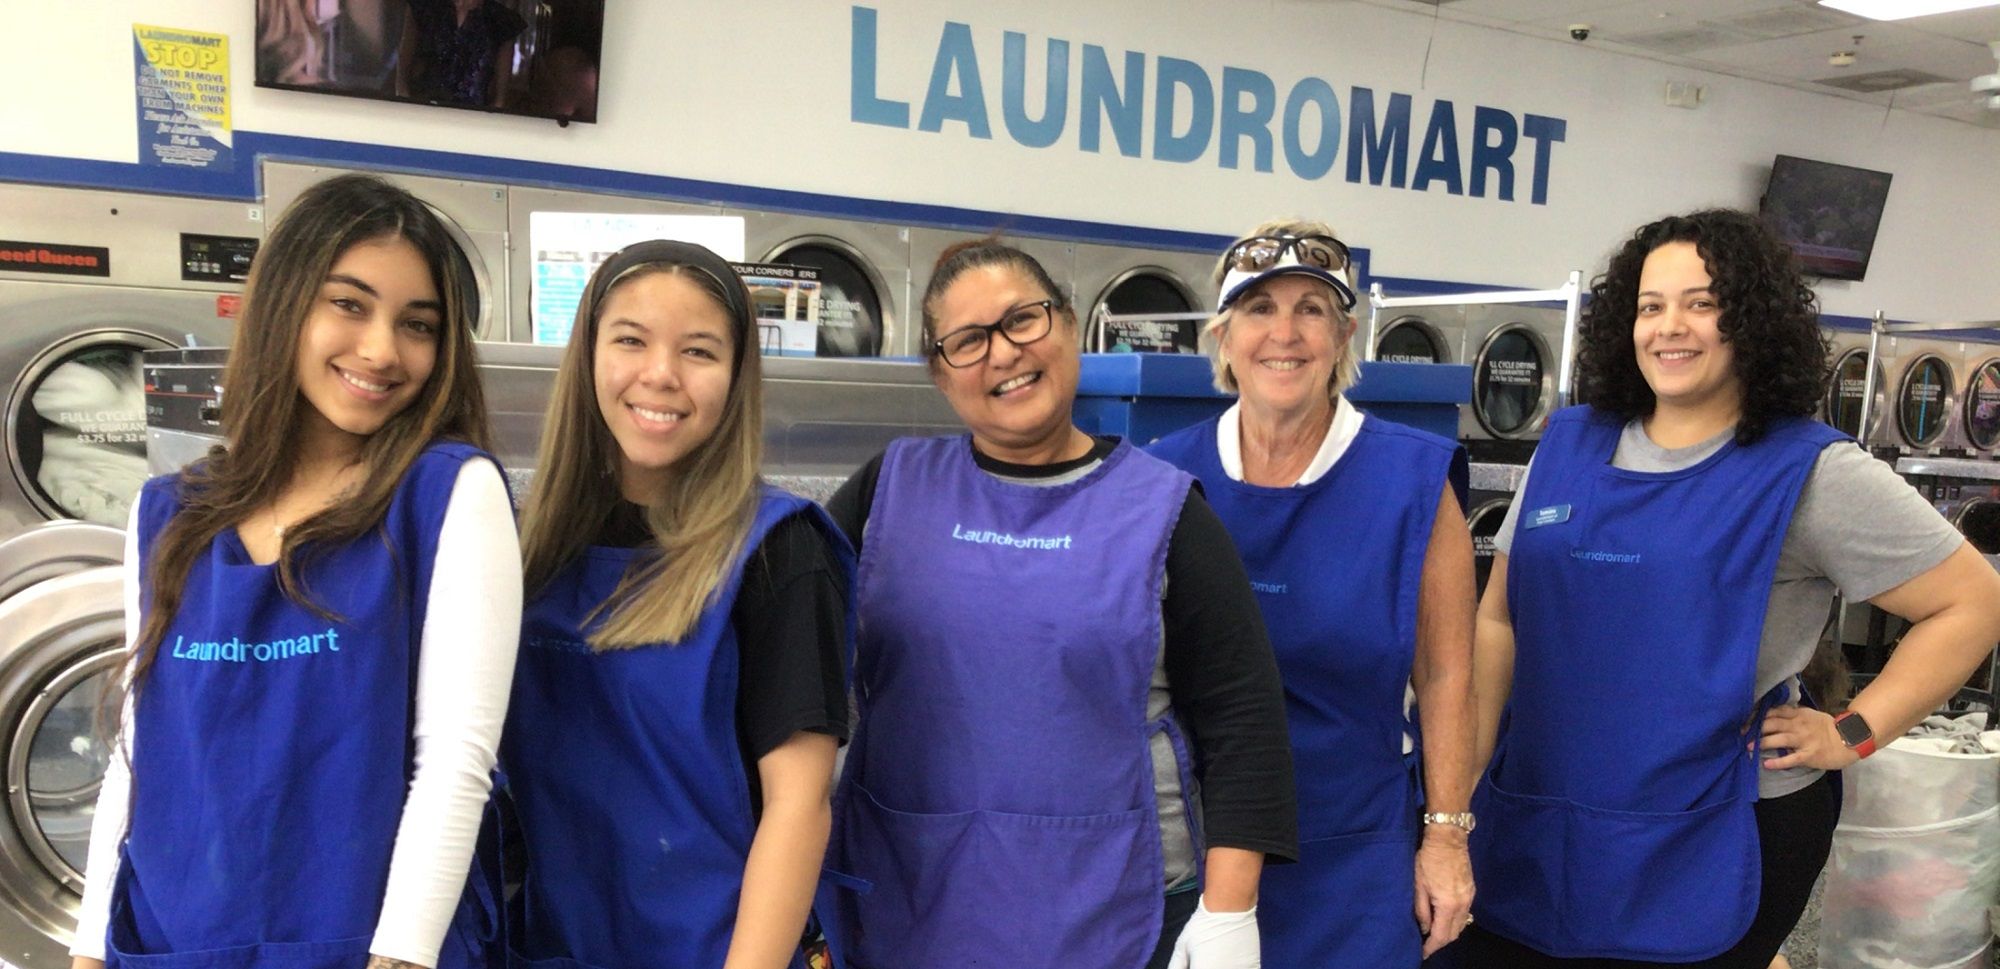 Laundromart of Four Corners coin laundry